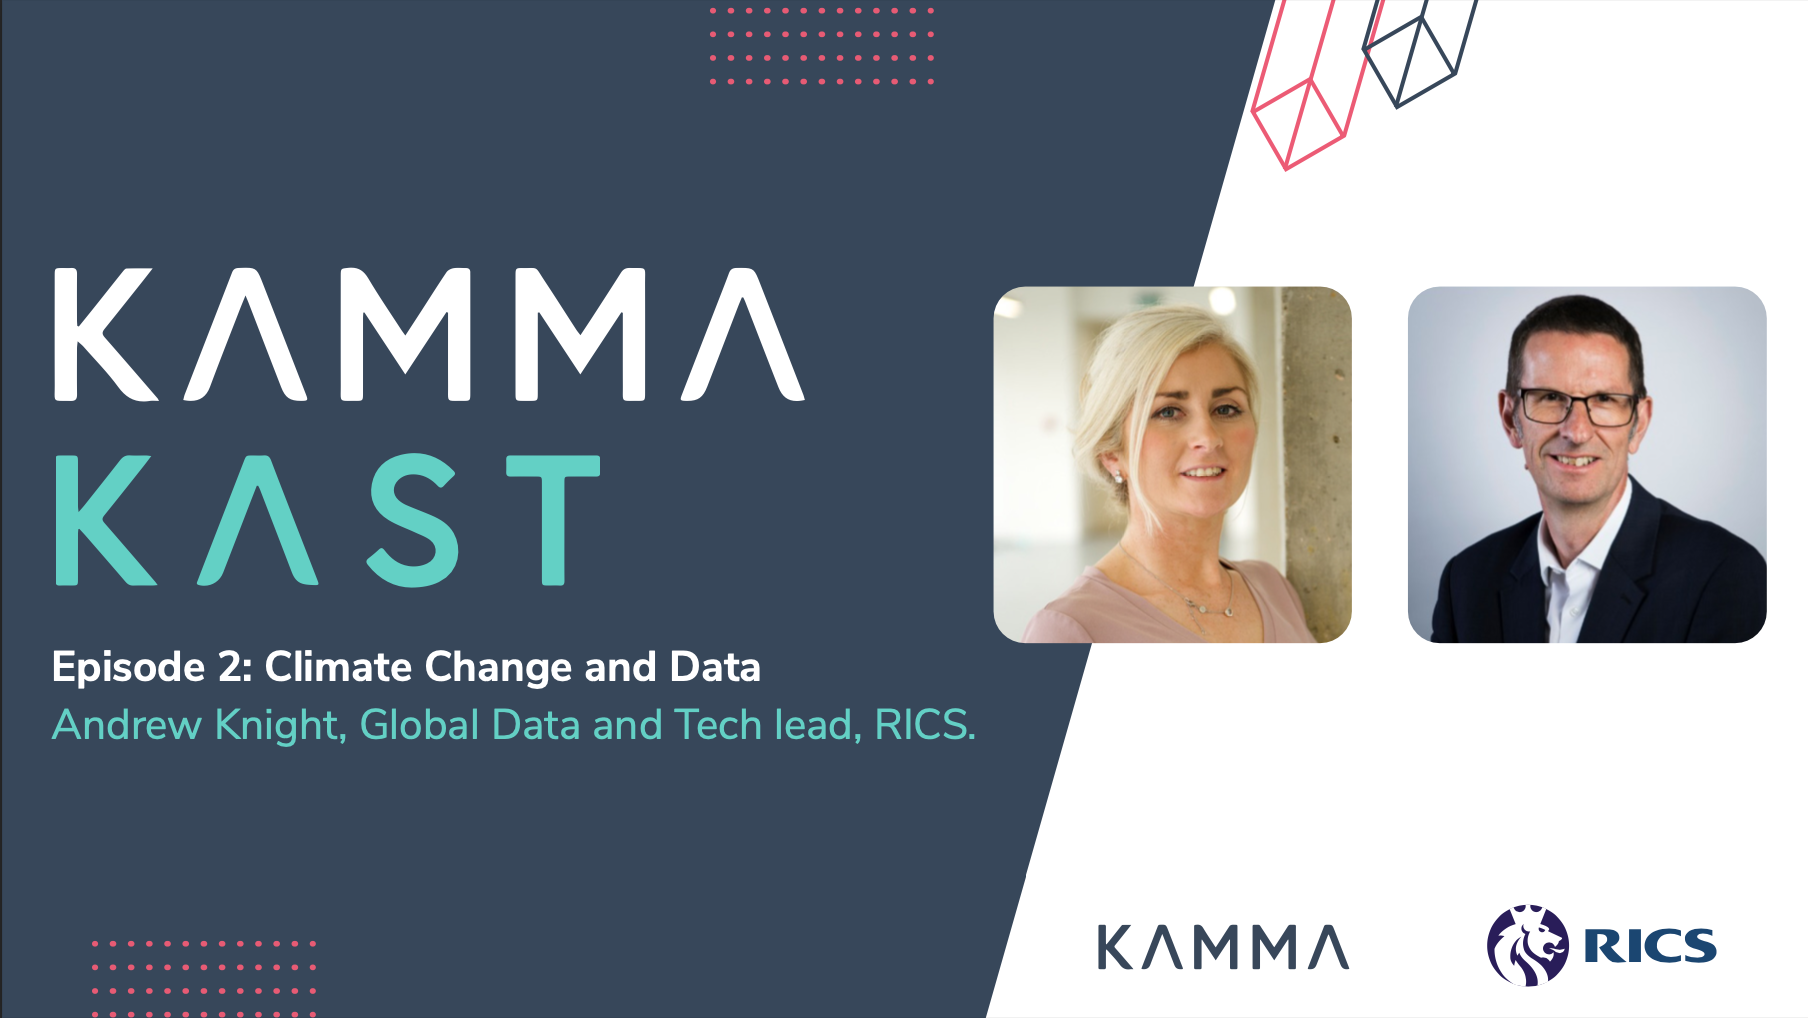 In this second episode of KammaKast, Kamma’s CEO Orla Shields is joined by Andrew Knight, International Data Standards Director at RICS